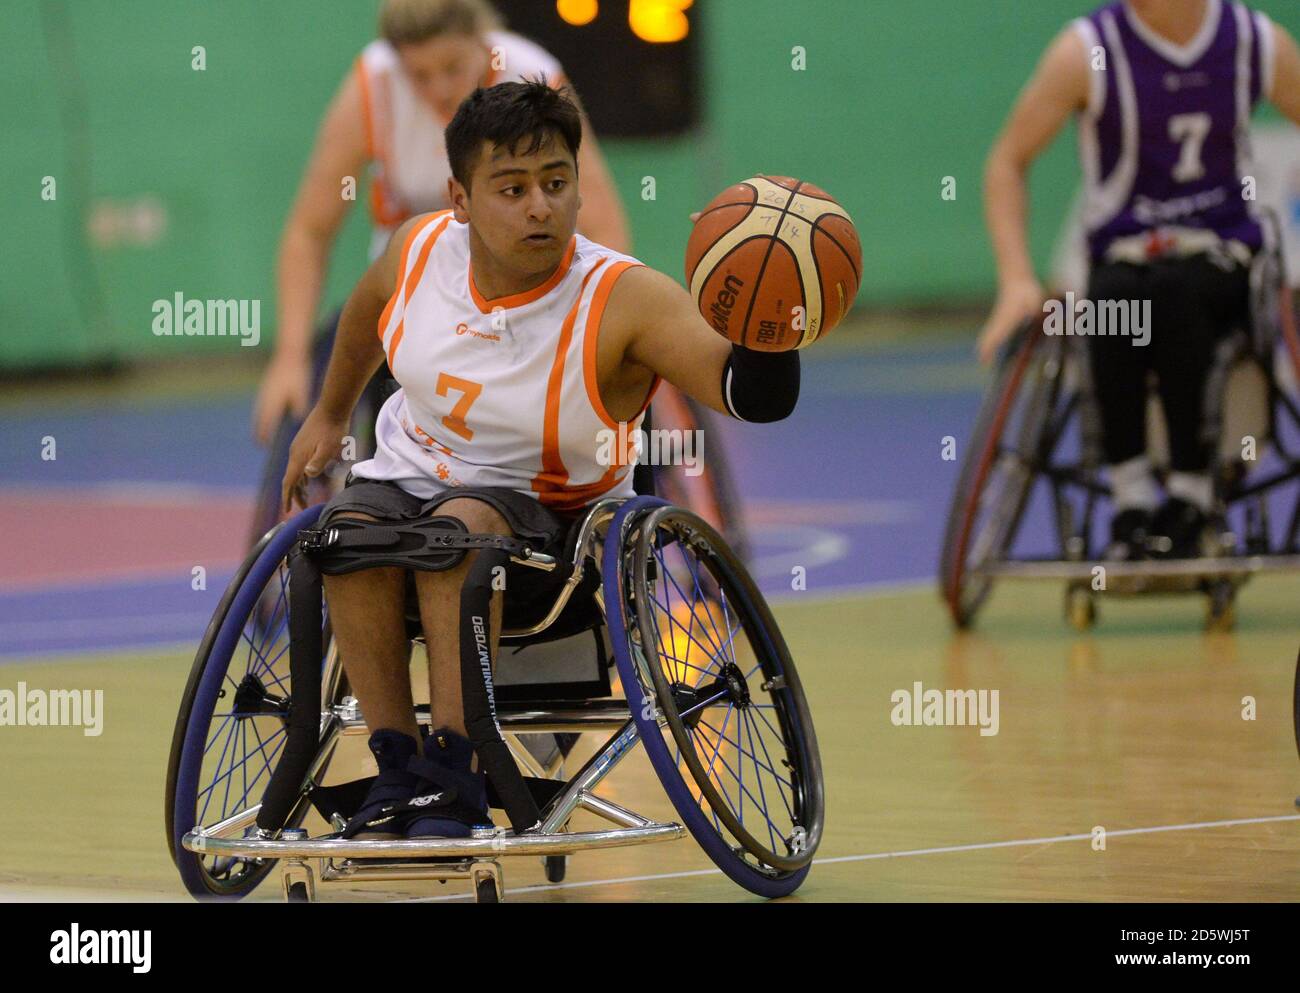 Central's Sameer Rehman competes during the Wheelchair Basketball Semi Final Competition during the 2017 School Games Stock Photo